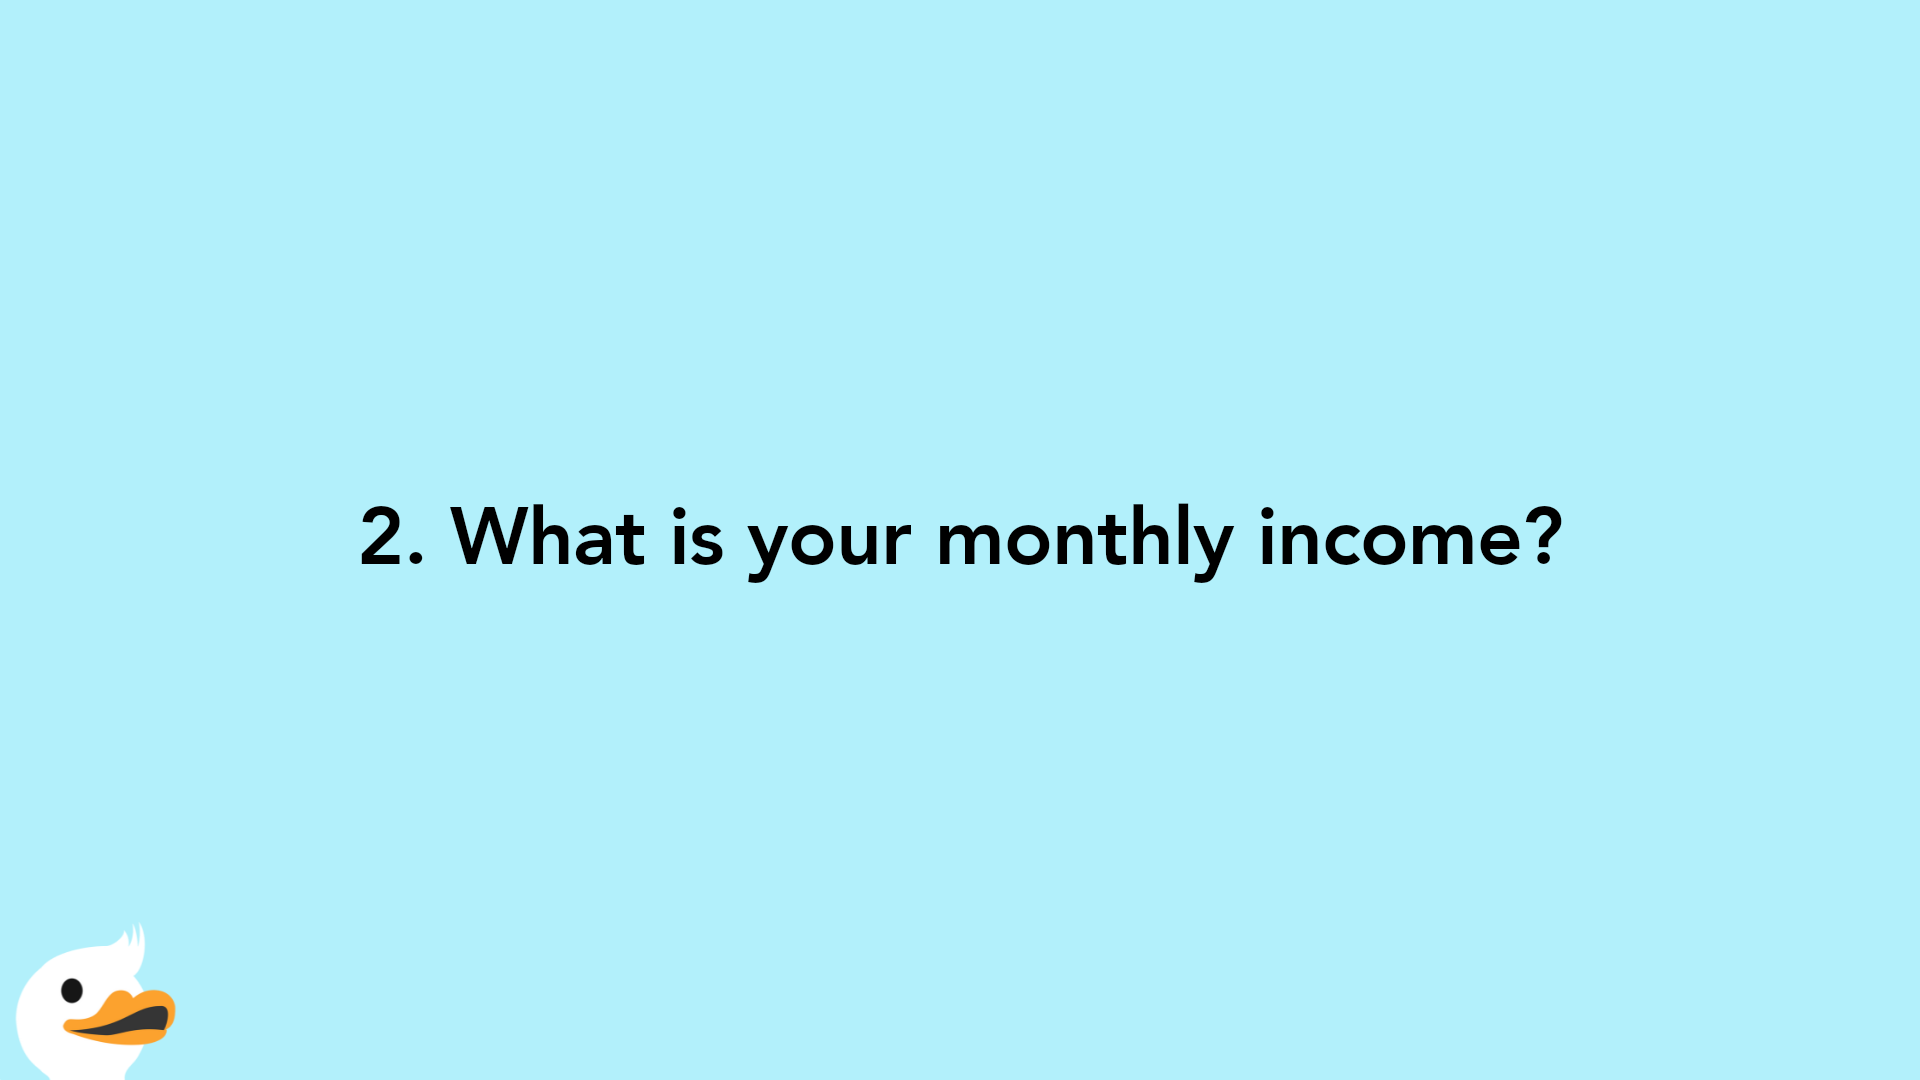 2. What is your monthly income?